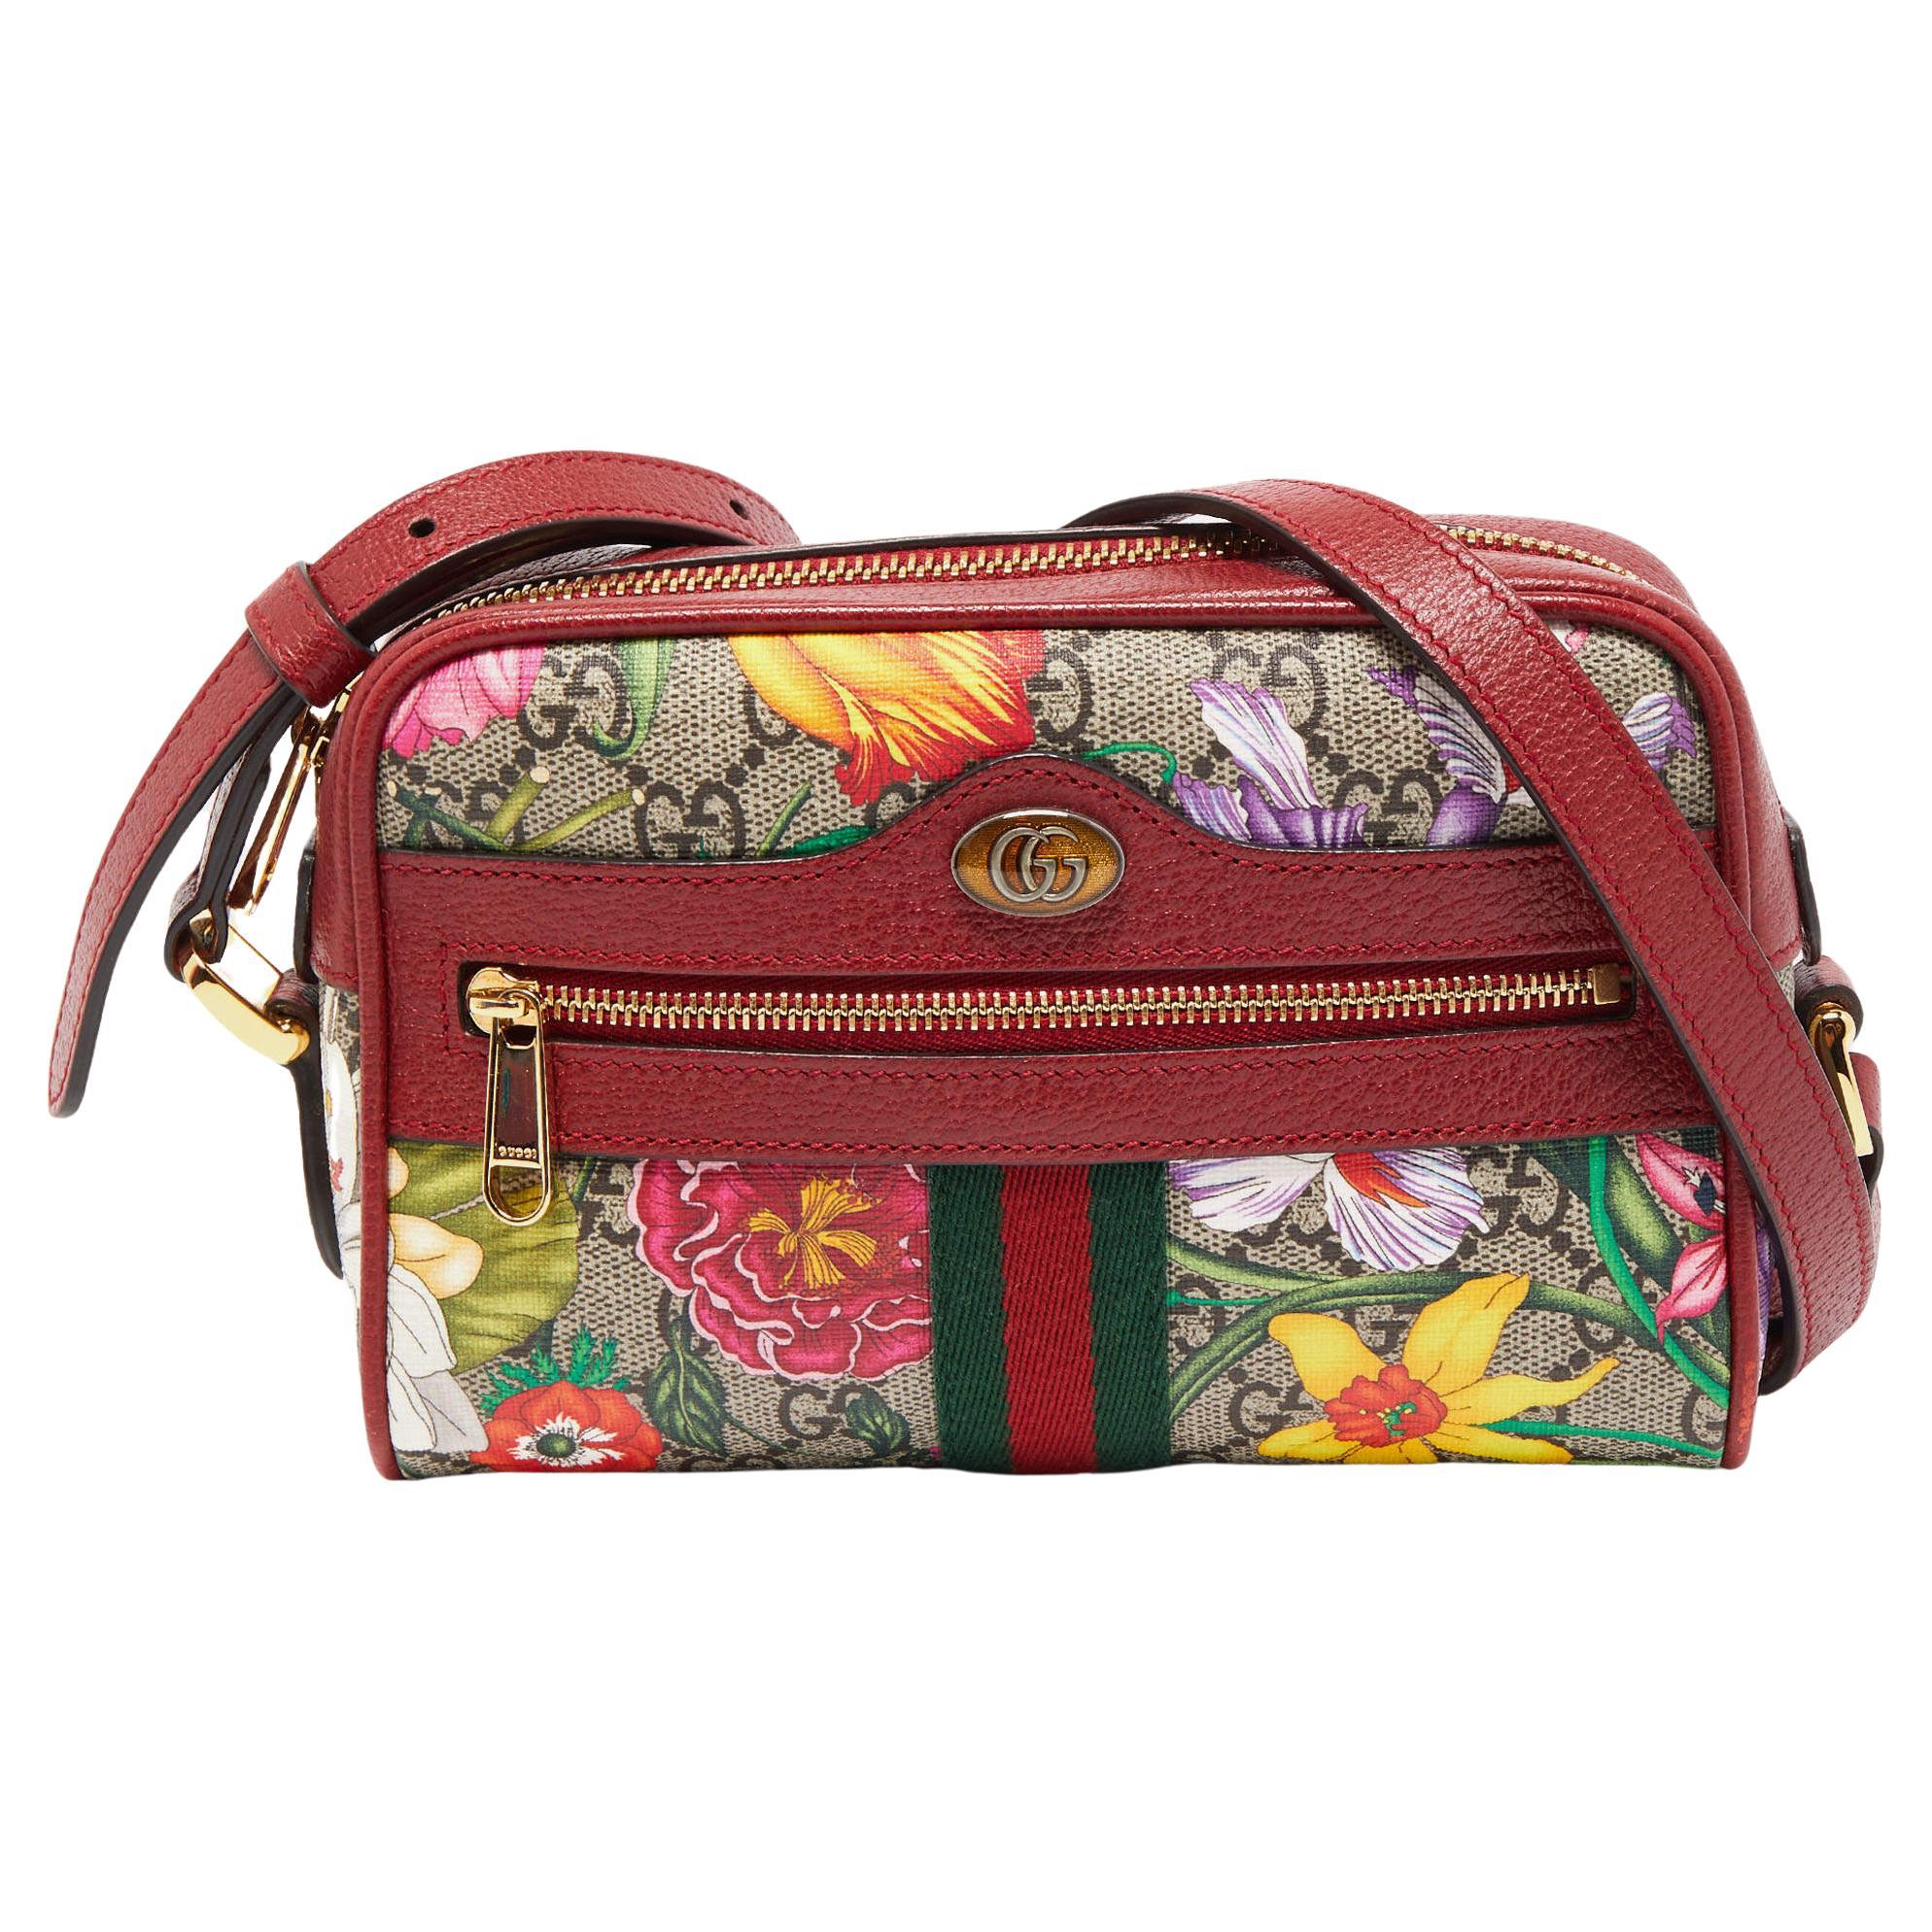 Gucci Red/Beige GG Supreme Canvas Mini Floral Ophidia Crossbody Bag